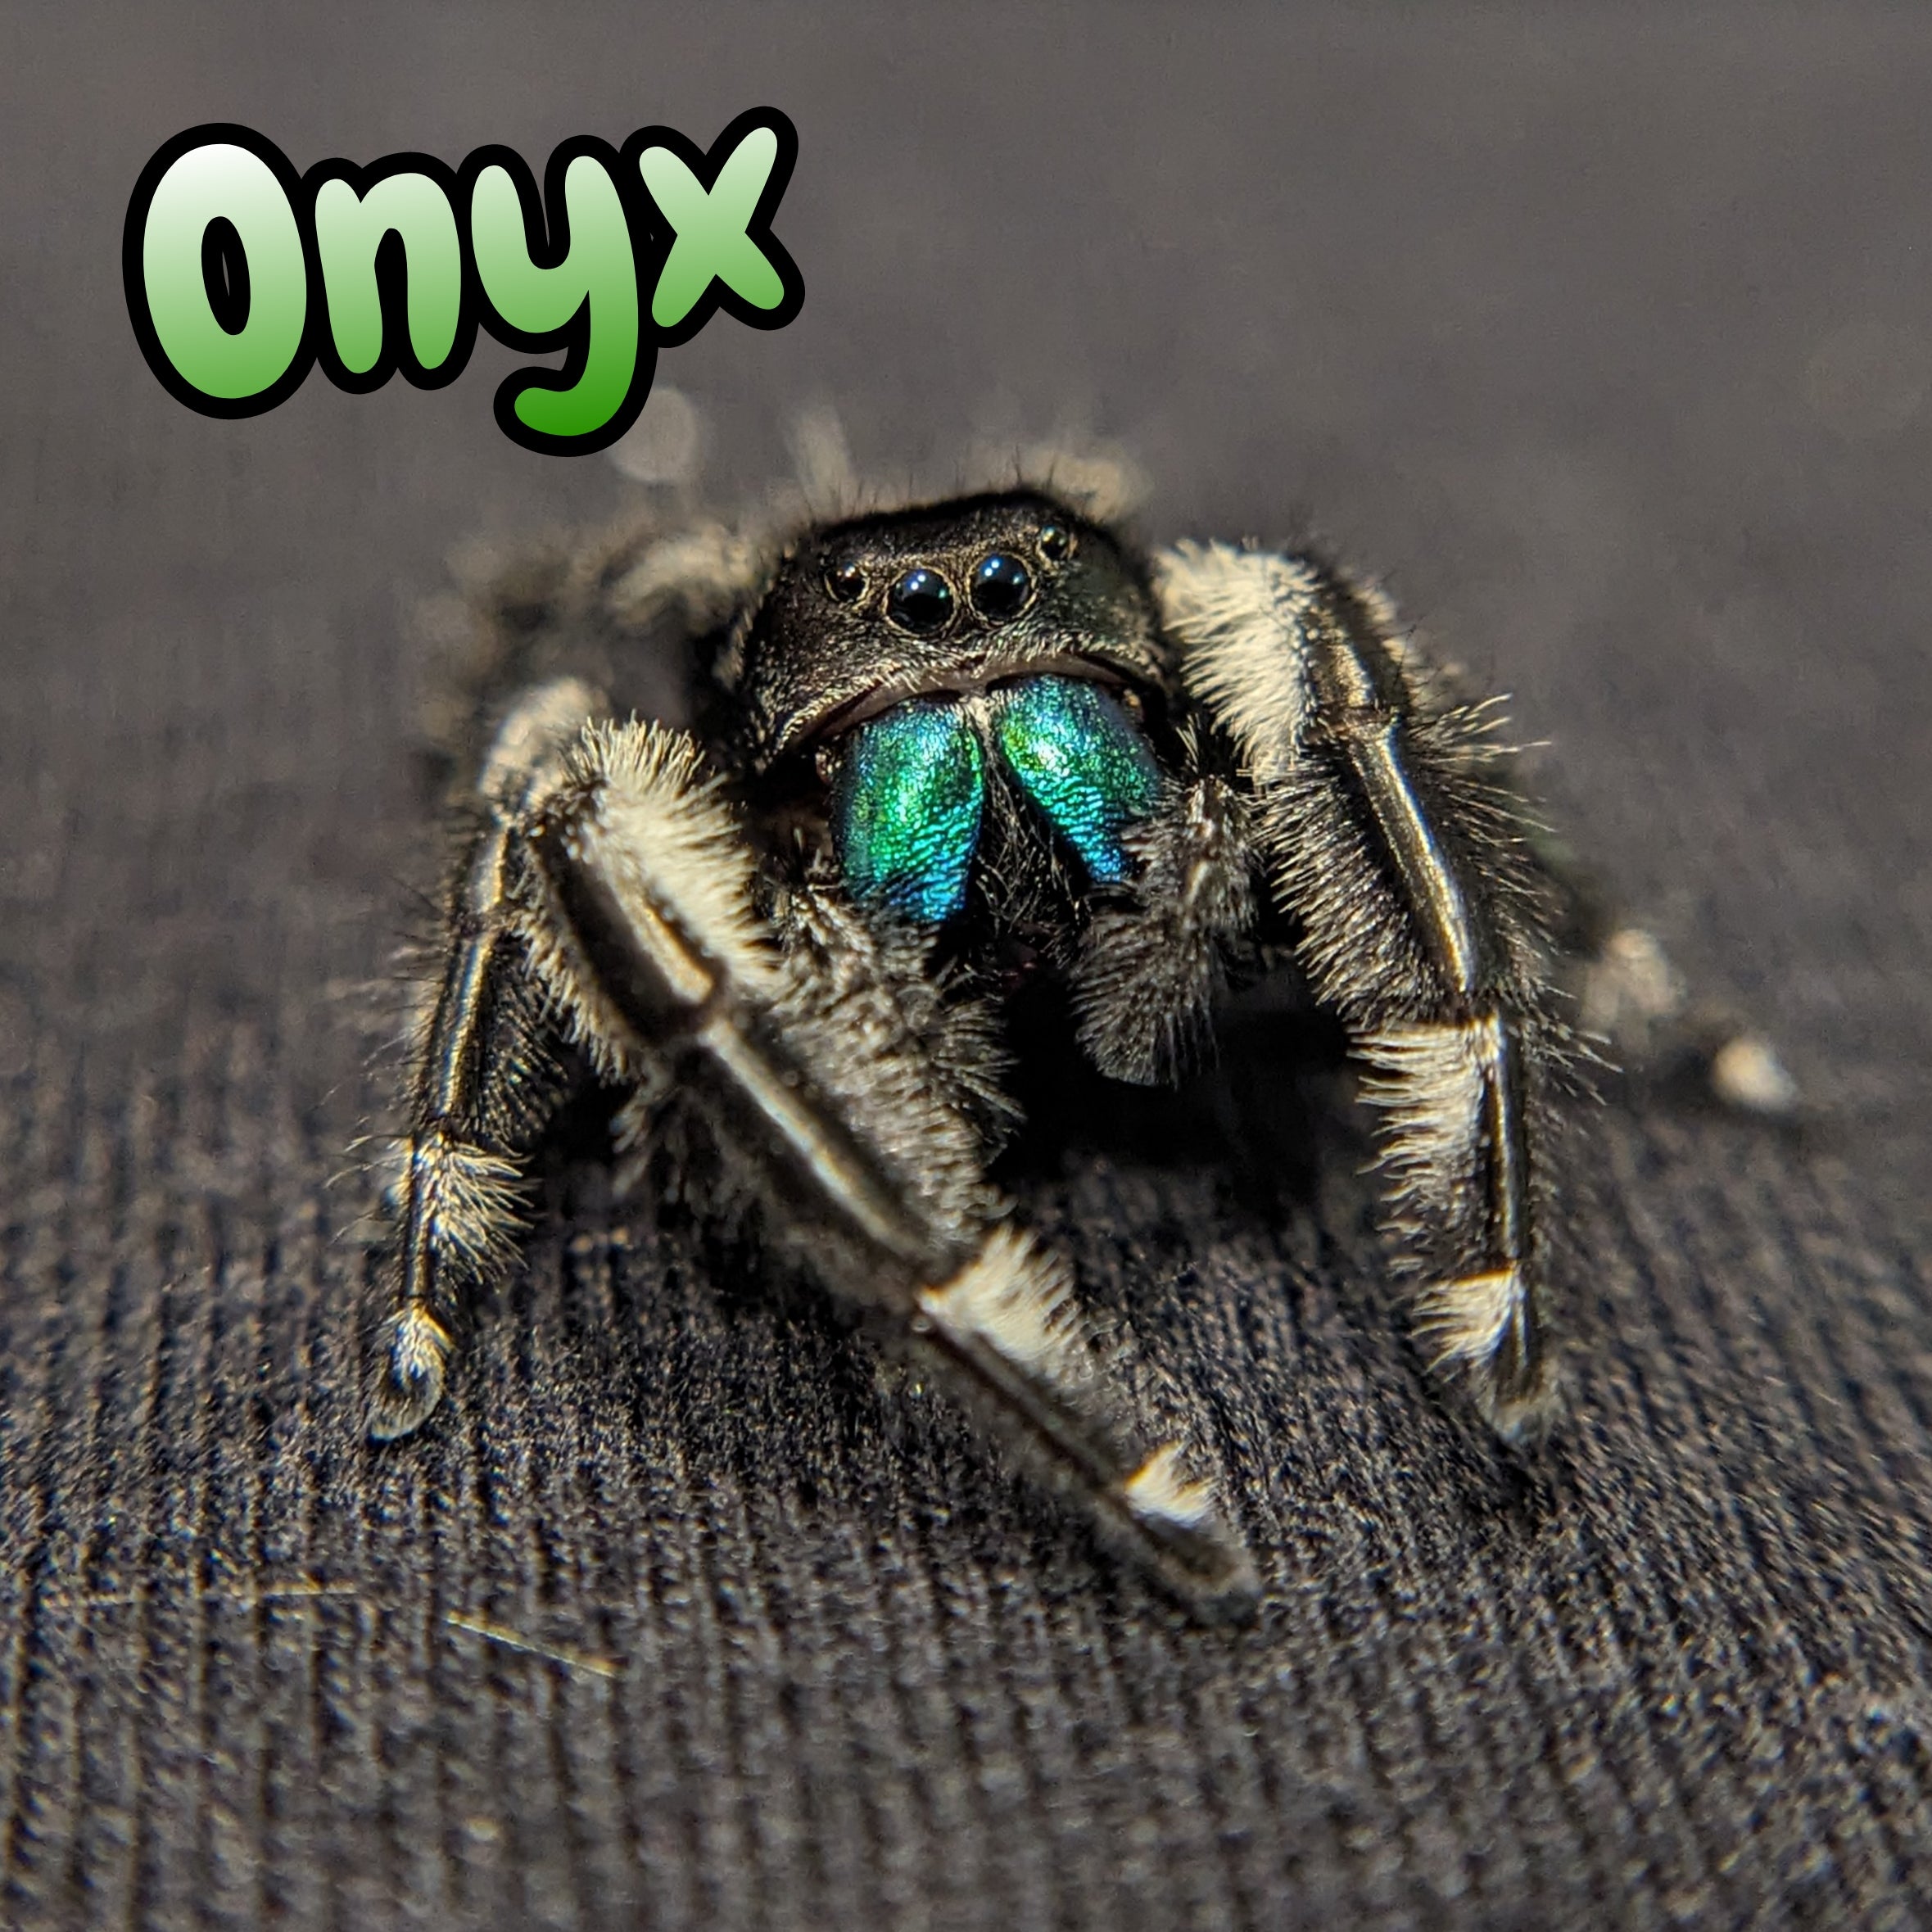 Regal Jumping Spider "Onyx"